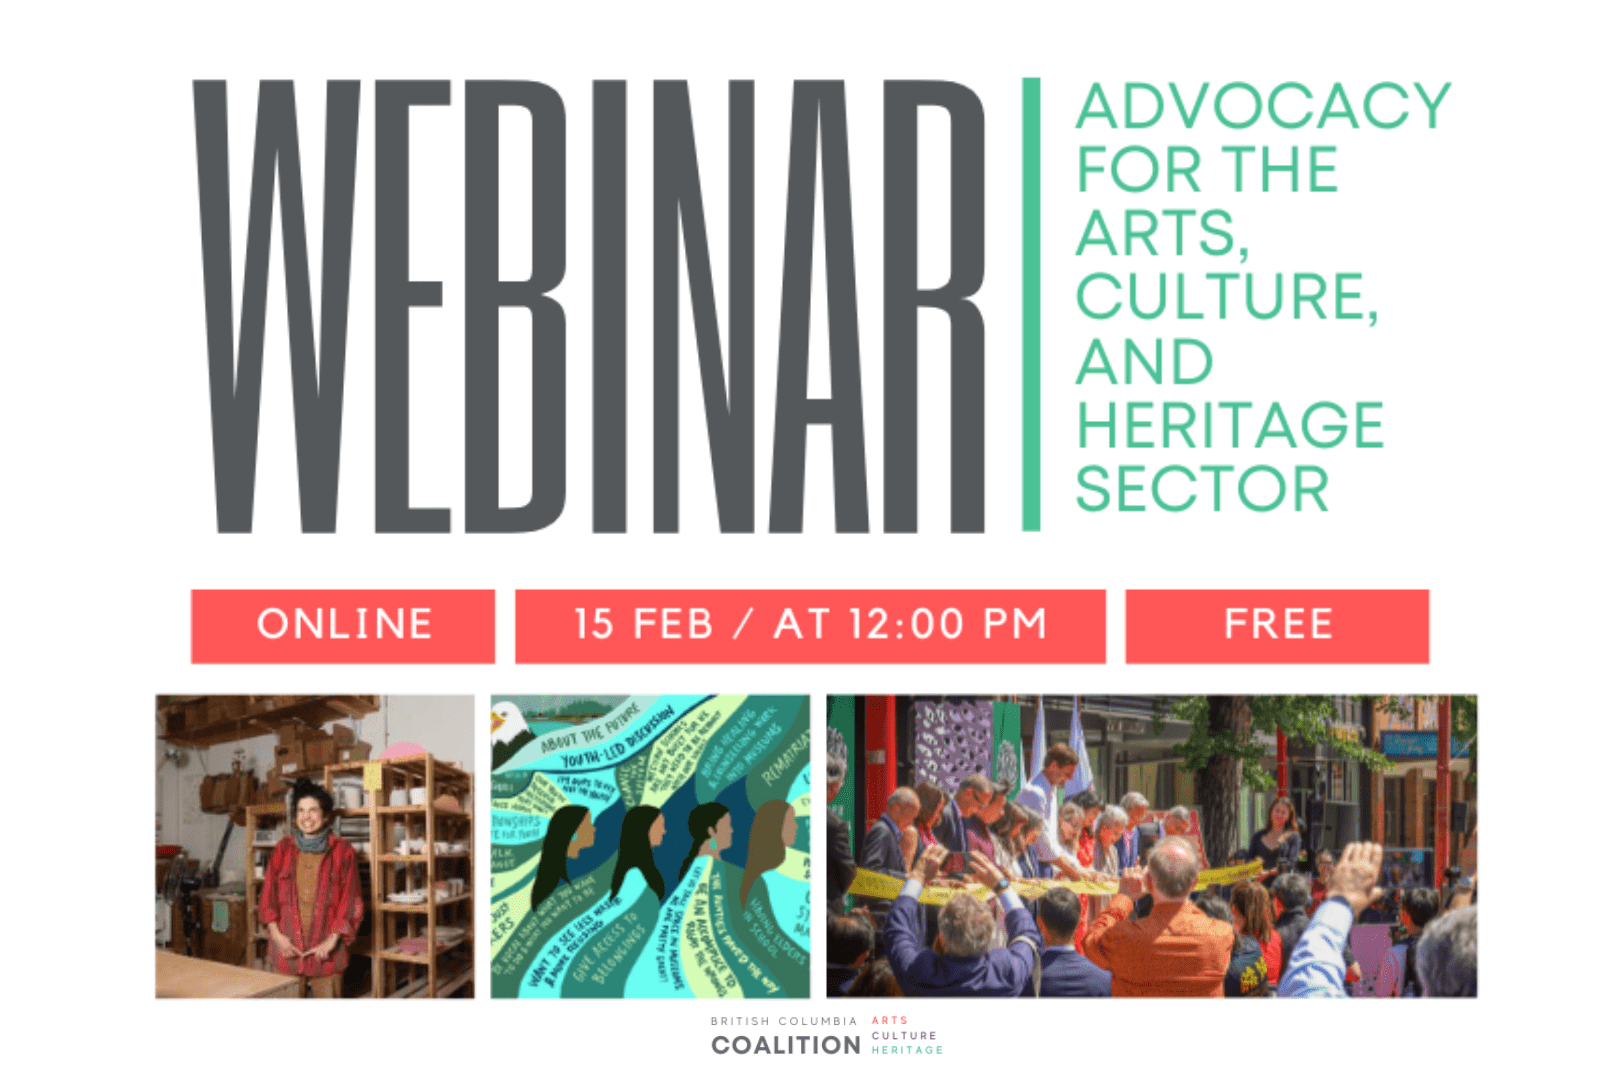 Webinar: Advocacy for the Arts, Culture, and Heritage Sector